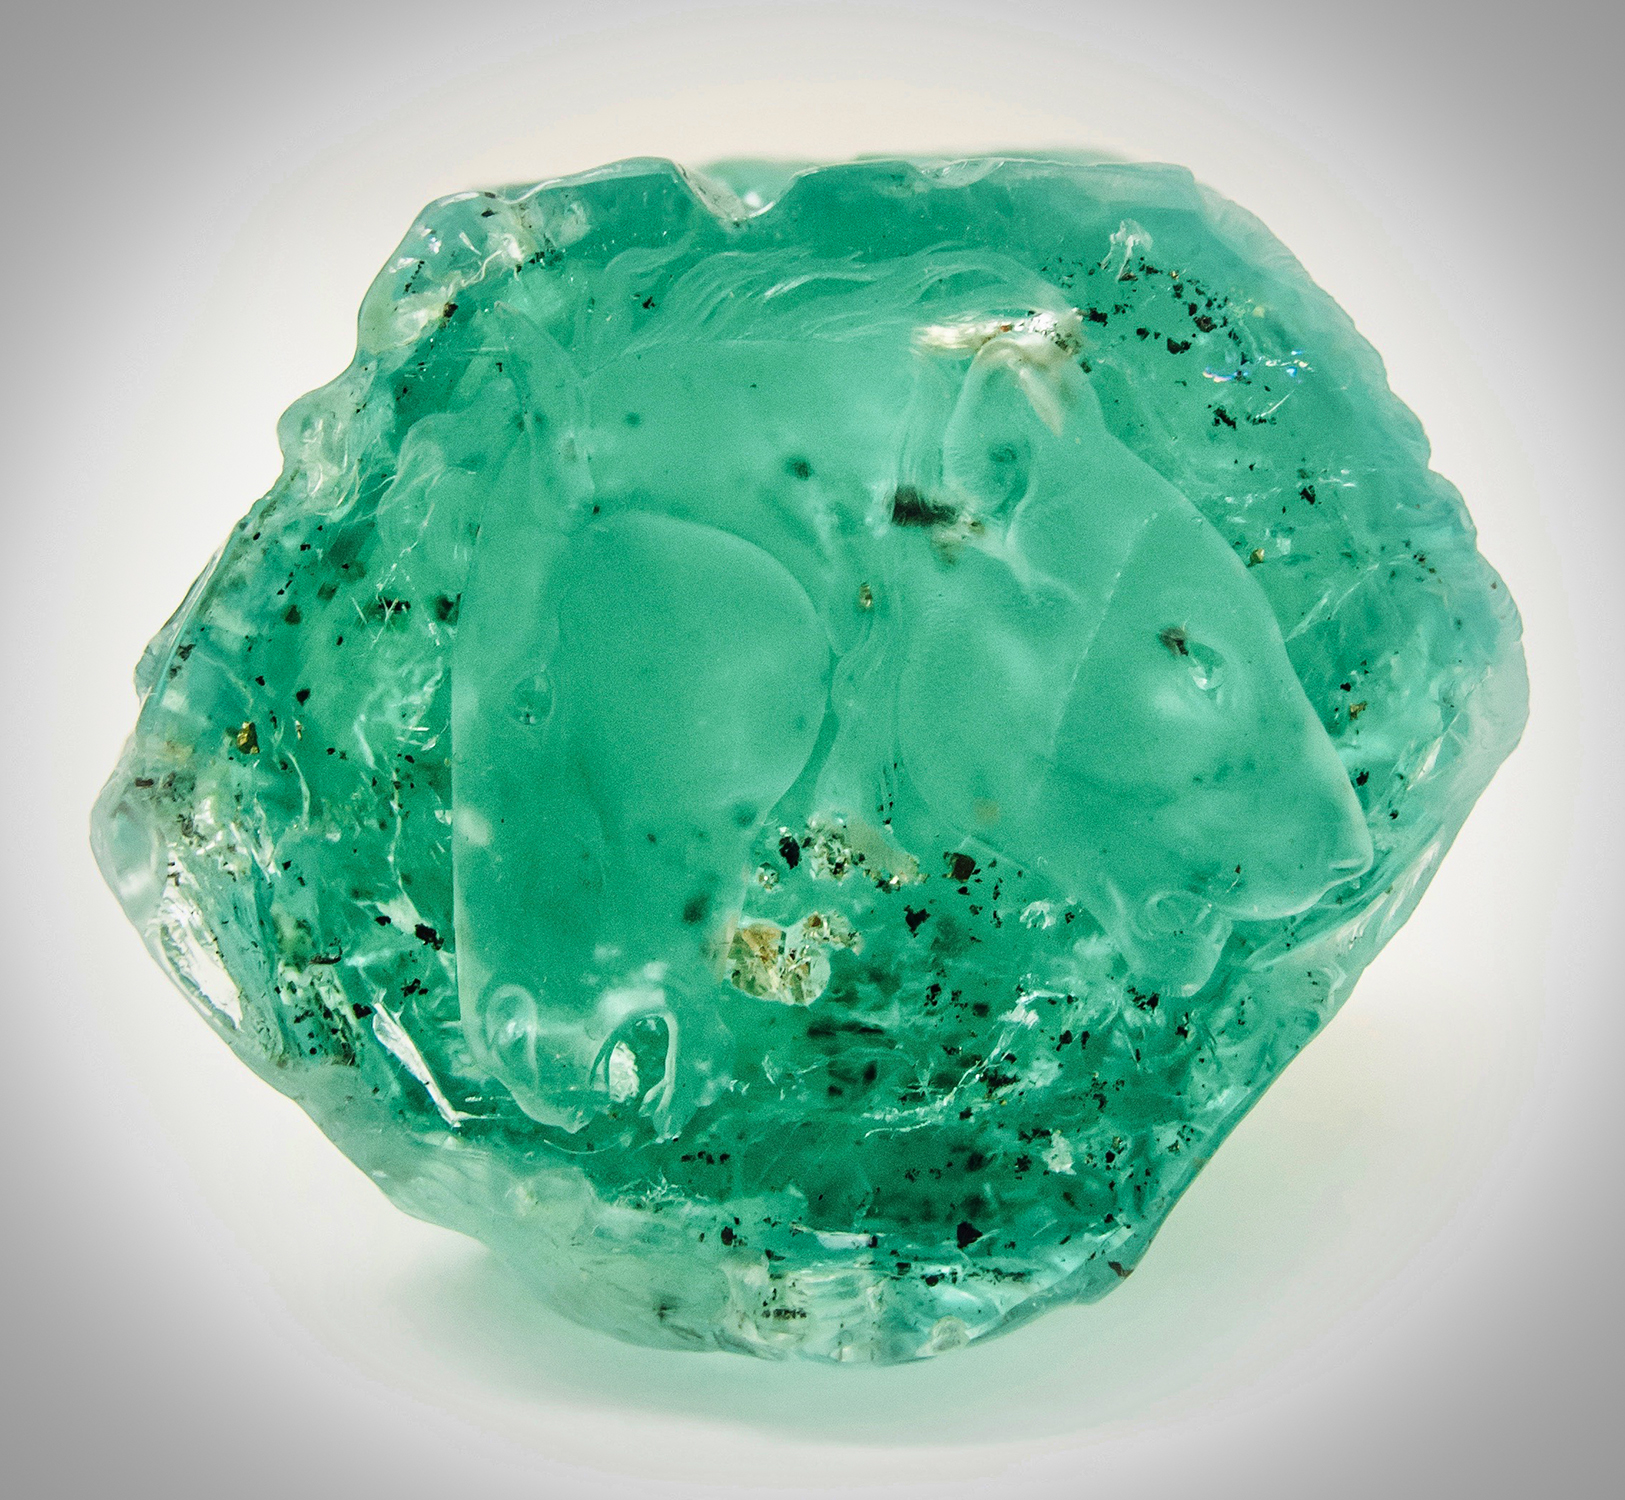  Intaglio seal carving on the base of the Emerald represents the unified ethos of both Europe and The Americas. 